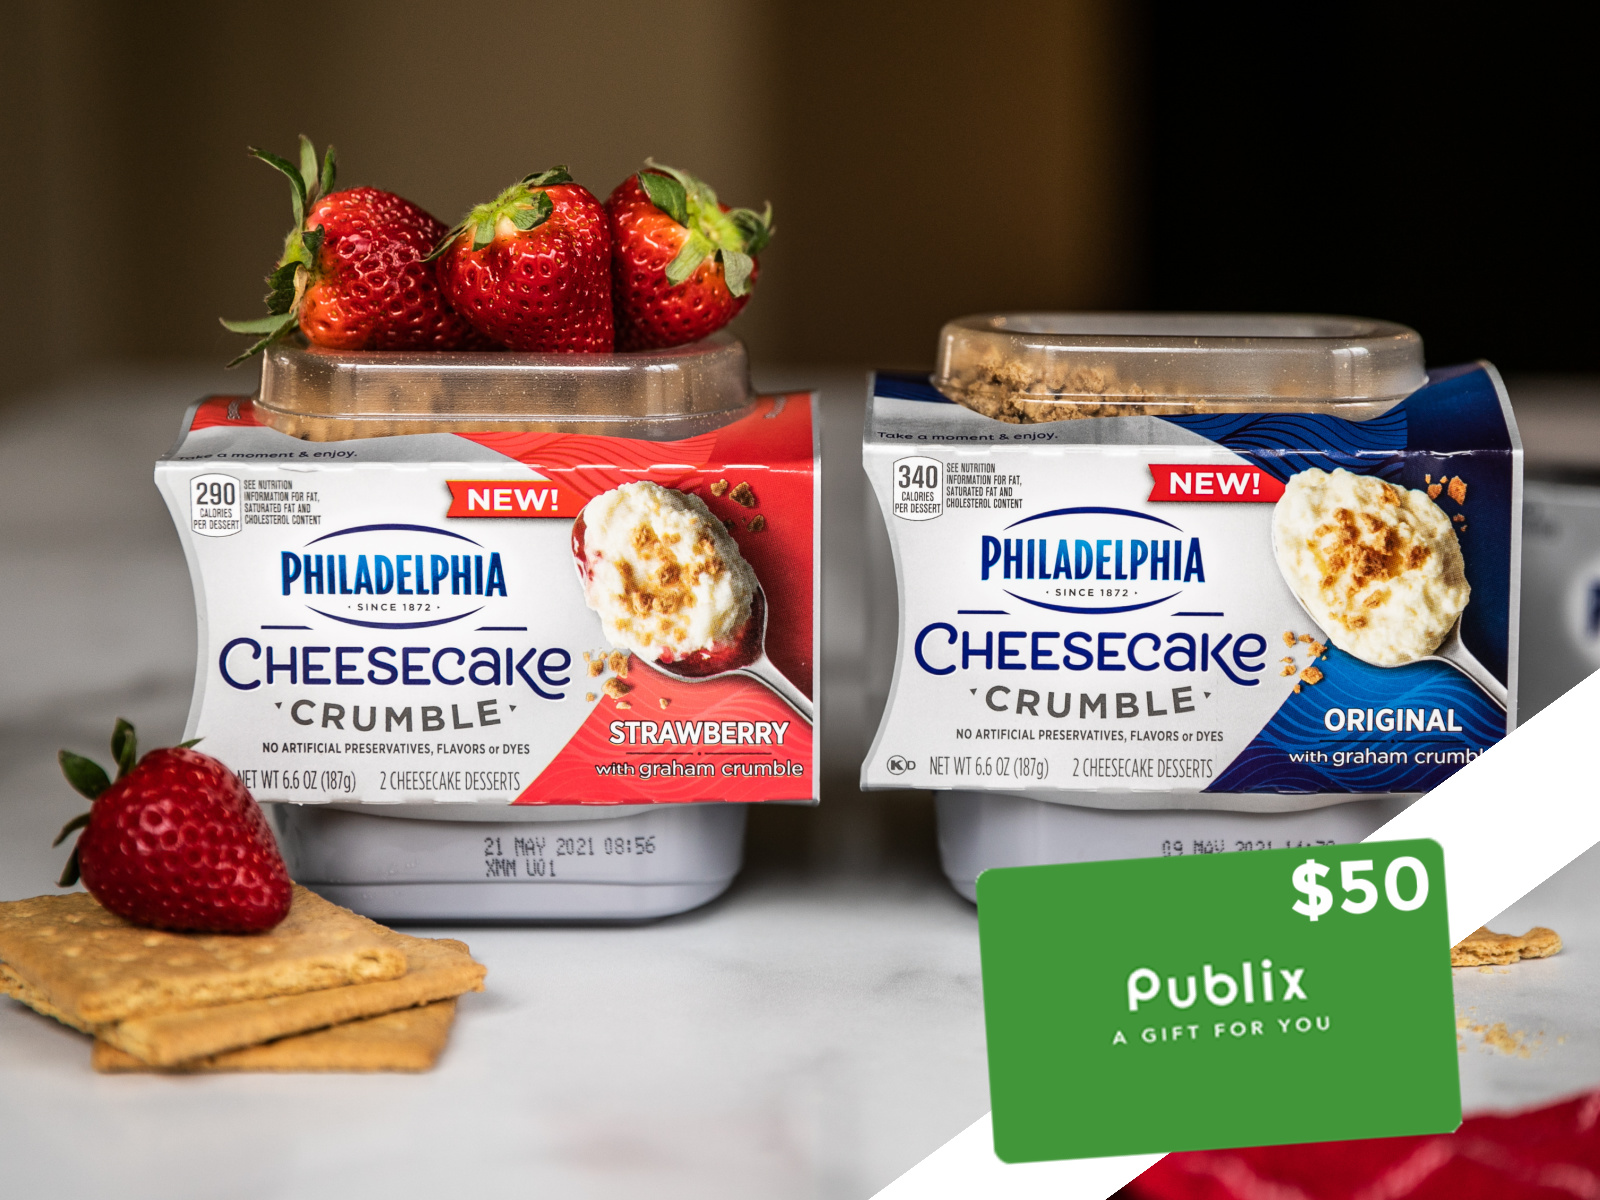 Four Readers Win A $50 Publix Gift Card To Try Delicious New PHILADELPHIA Cheesecake Crumble Desserts